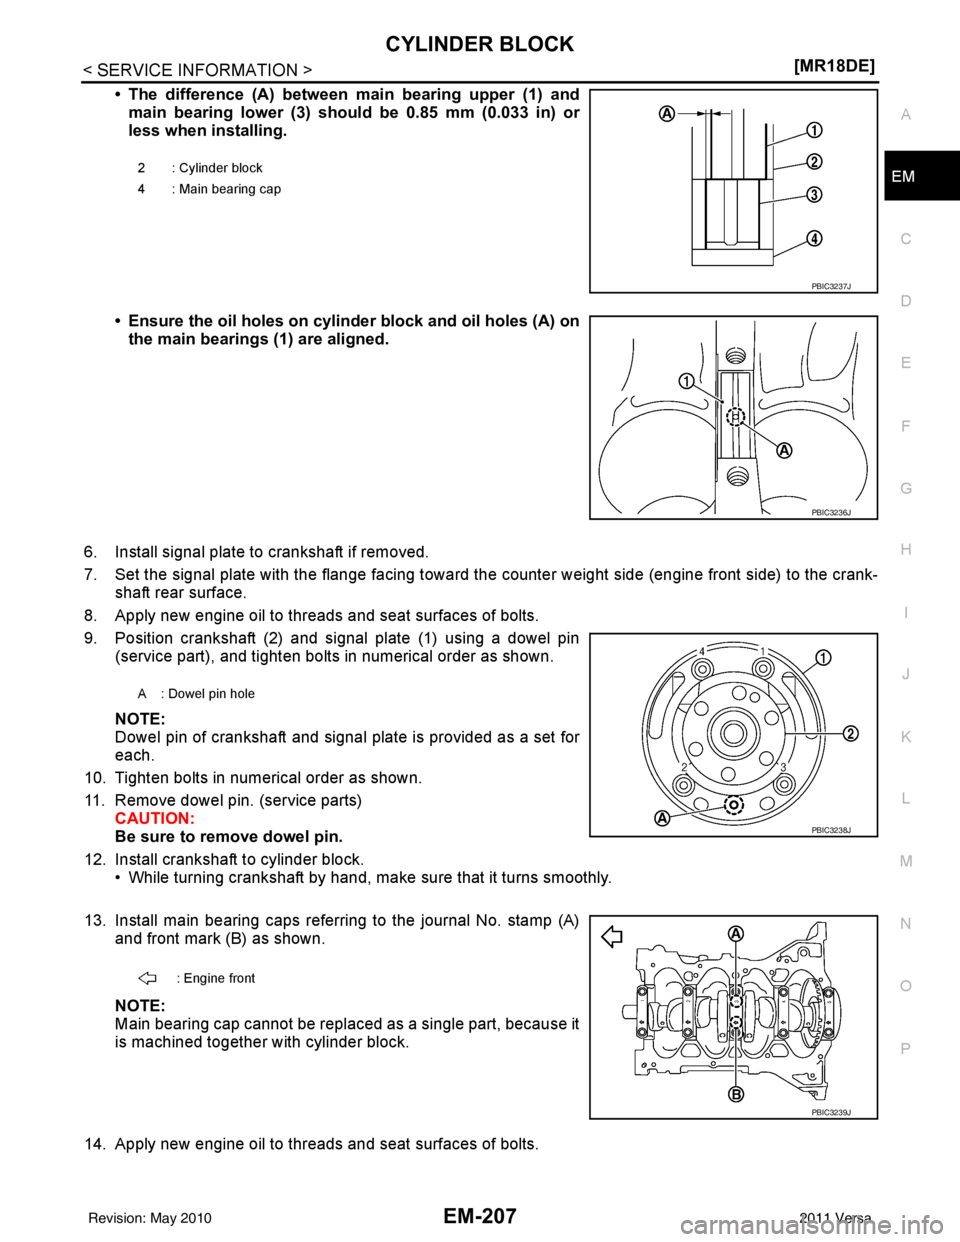 NISSAN LATIO 2011  Service Repair Manual CYLINDER BLOCKEM-207
< SERVICE INFORMATION > [MR18DE]
C
D
E
F
G H
I
J
K L
M A
EM
NP
O
• The difference (A) between main bearing upper (1) and
main bearing lower (3) should be 0.85 mm (0.033 in) or
l